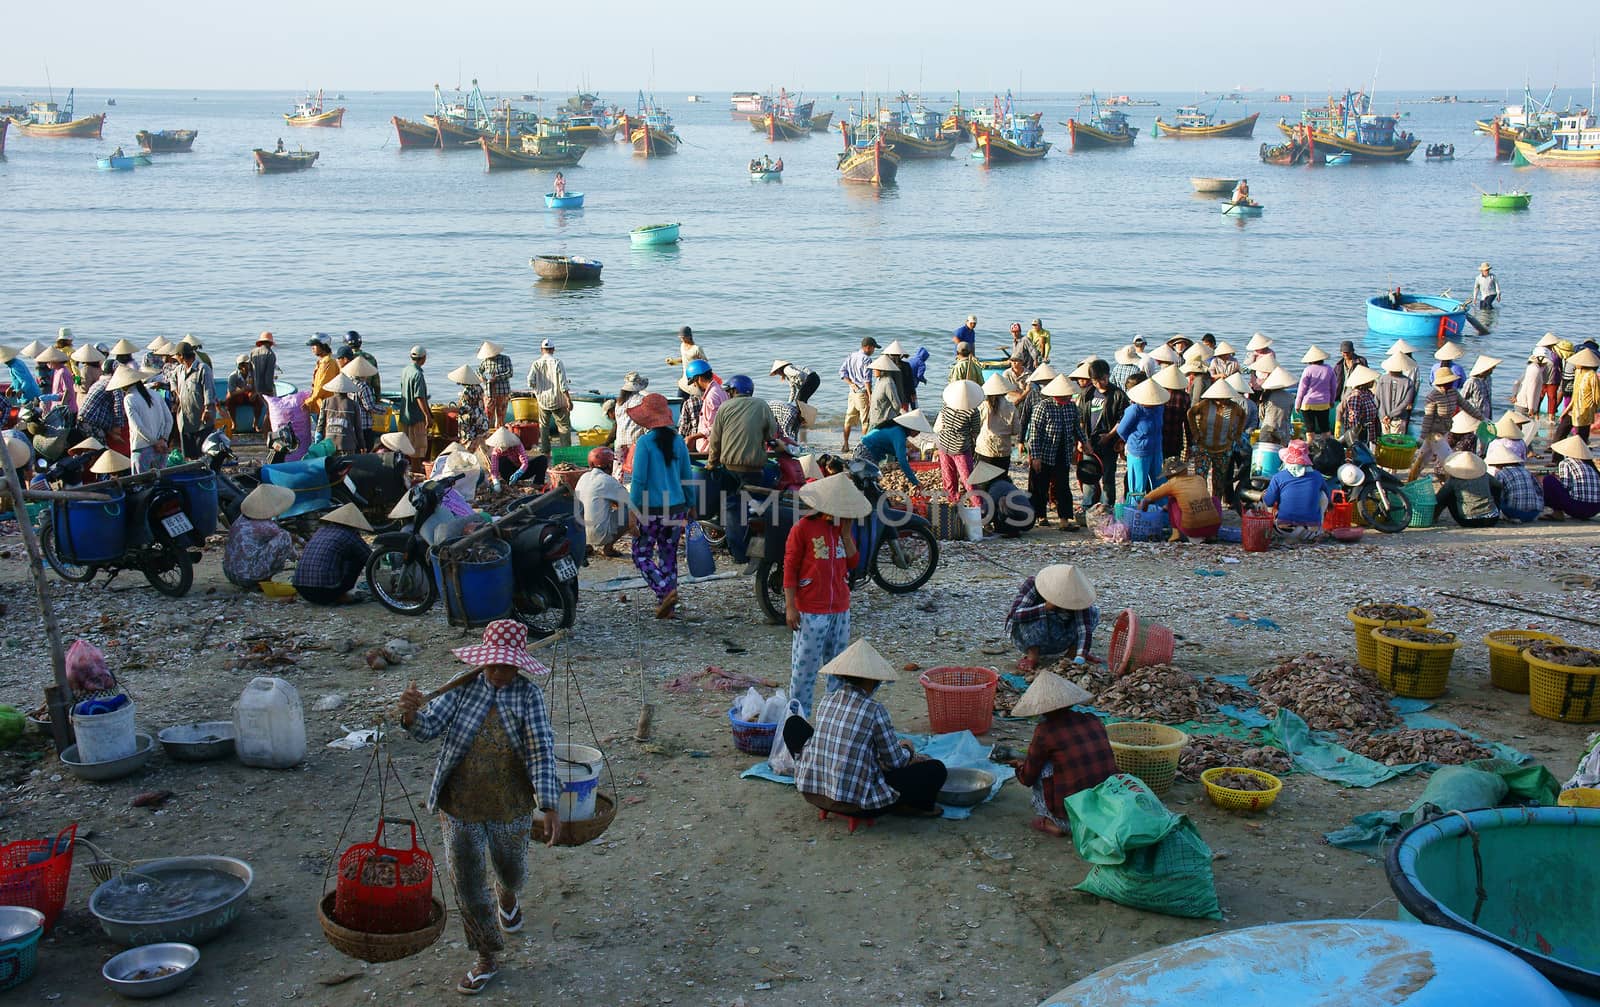  Crowed atmosphere at seafood market on beach by xuanhuongho